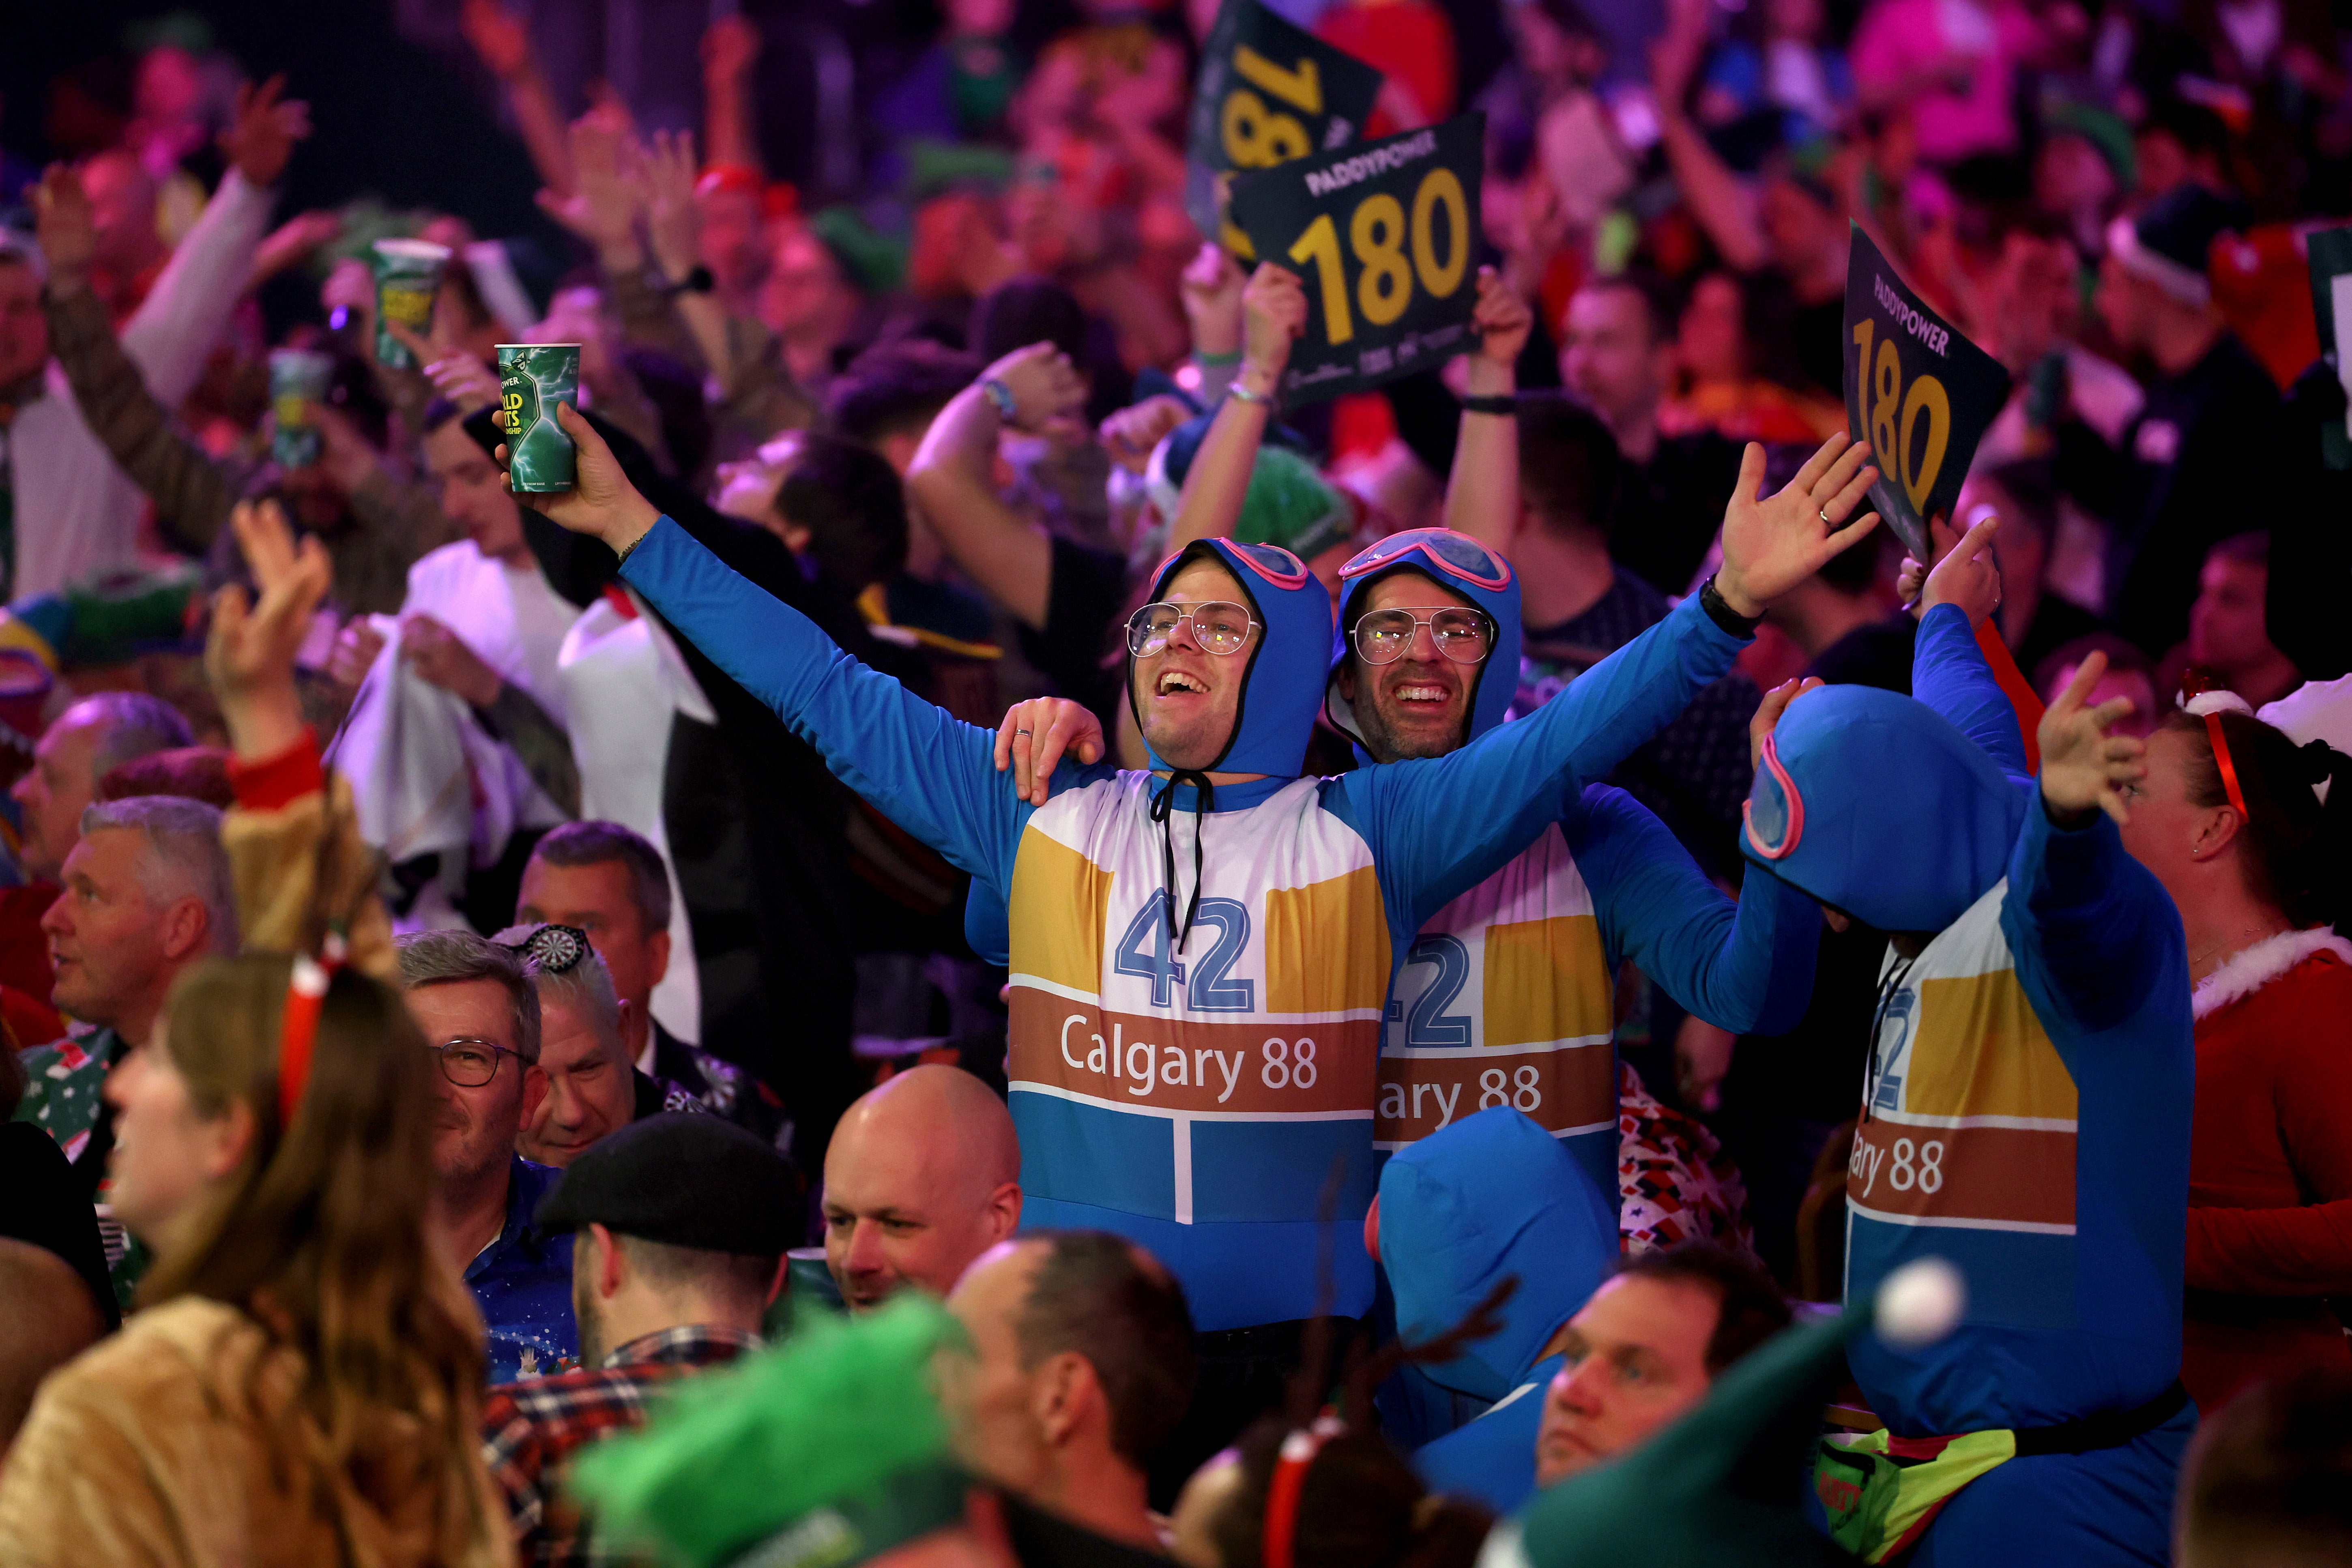 Having a brew-ski: fancy dress is encouraged and celebrated at the darts